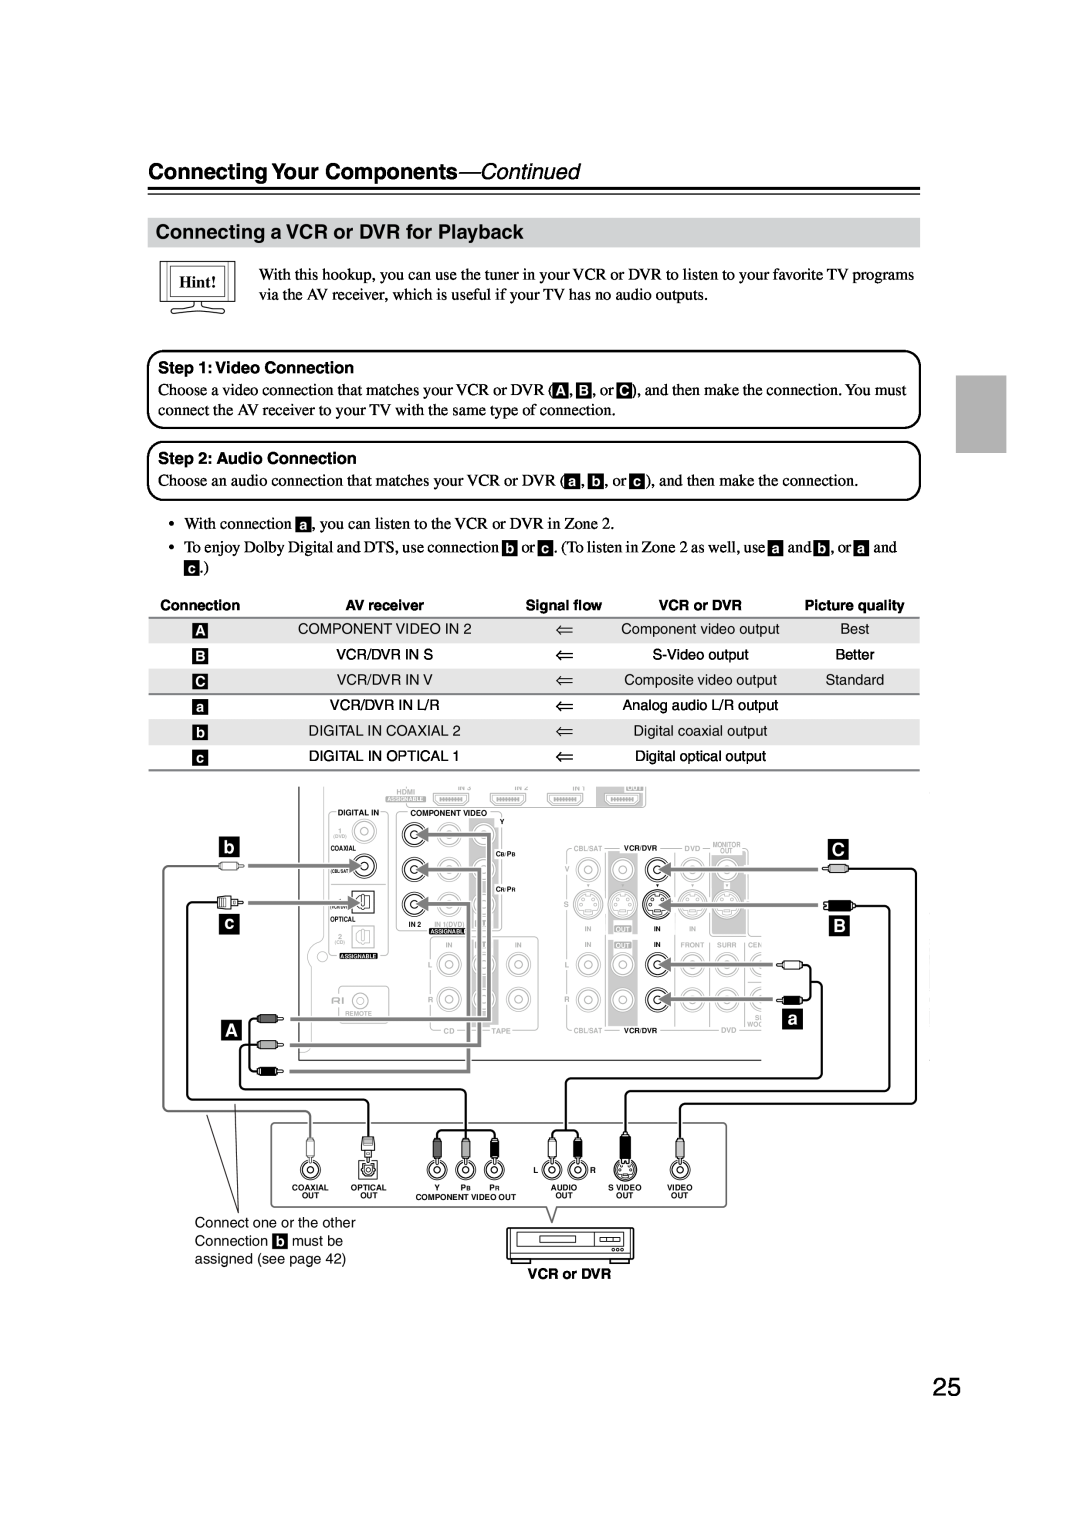 Onkyo TX-SR576, TX-SR506 instruction manual Connecting a VCR or DVR for Playback, Connecting Your Components—Continued, Hint 